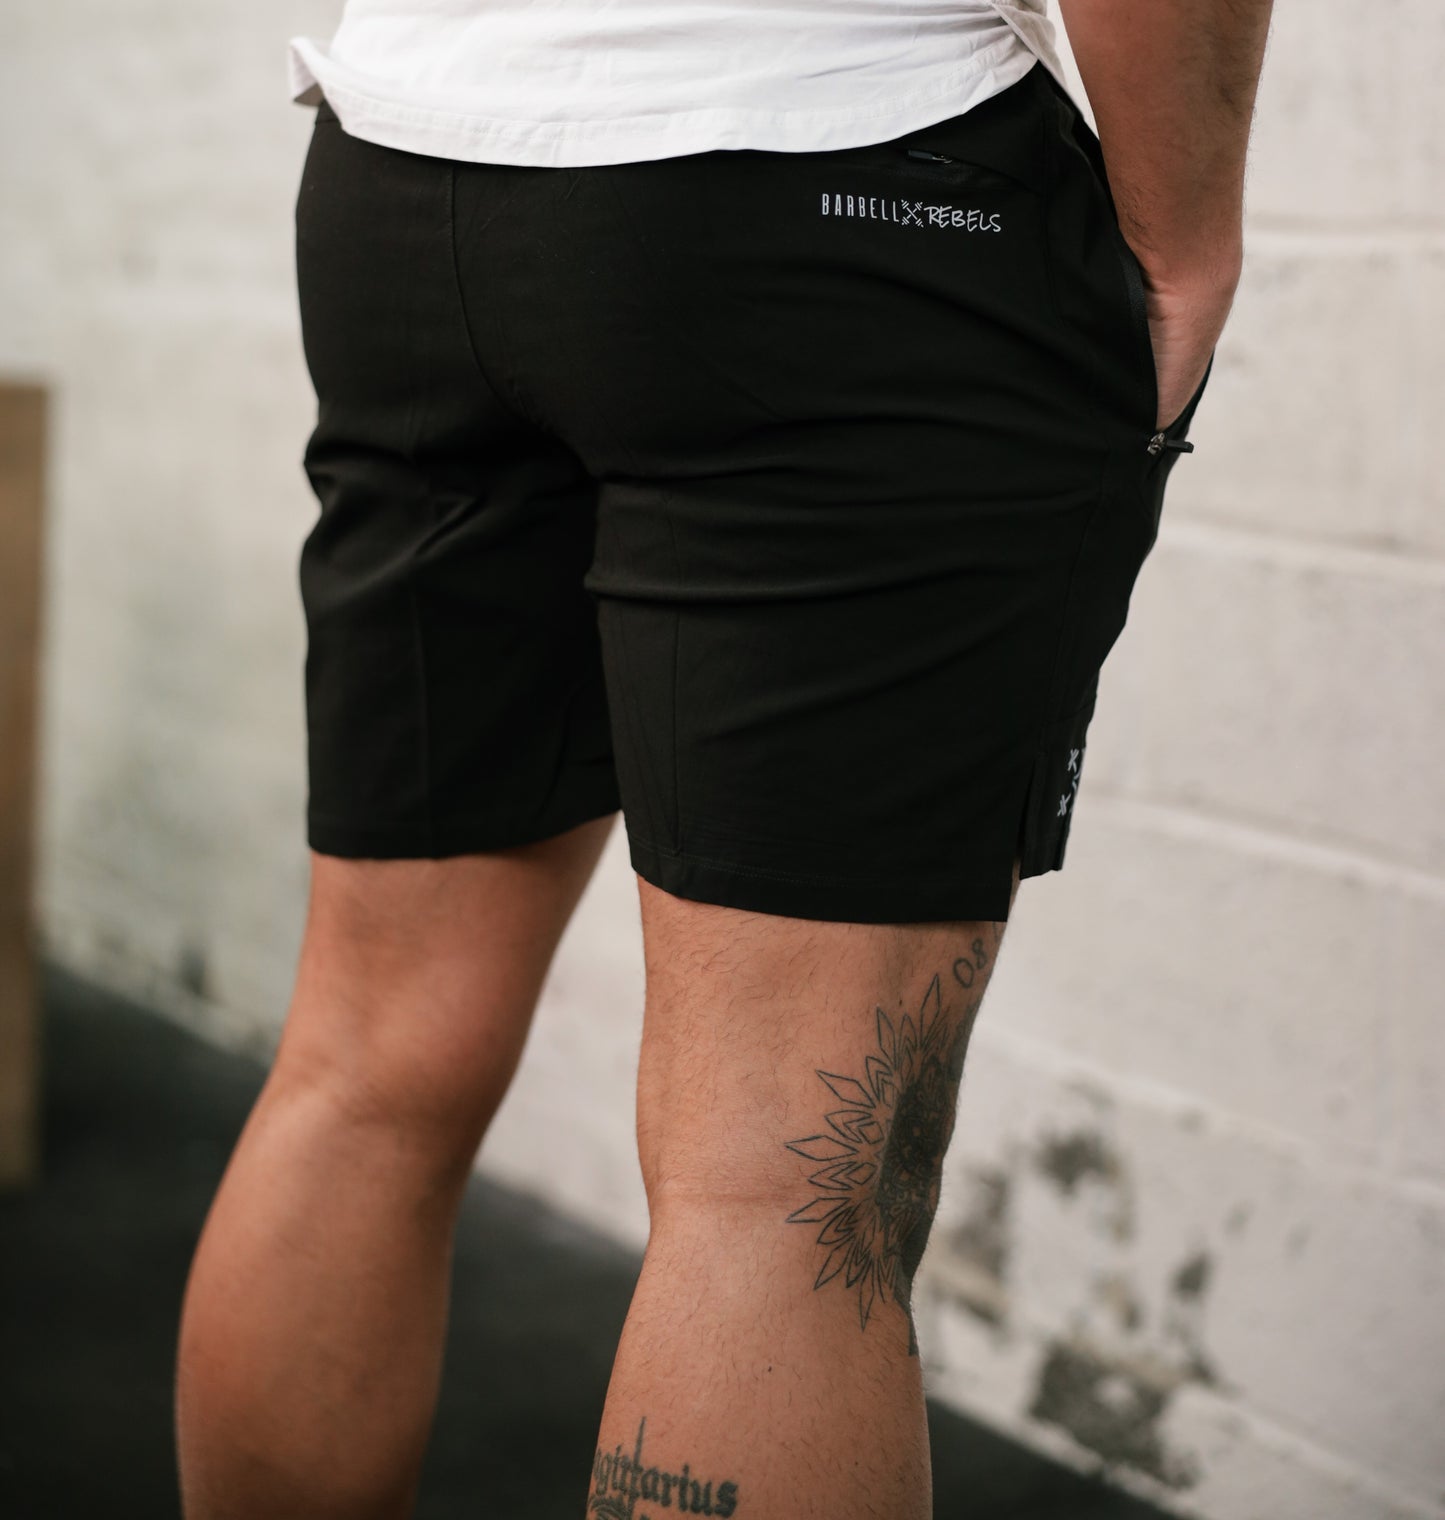 Man Competition Shorts 6"